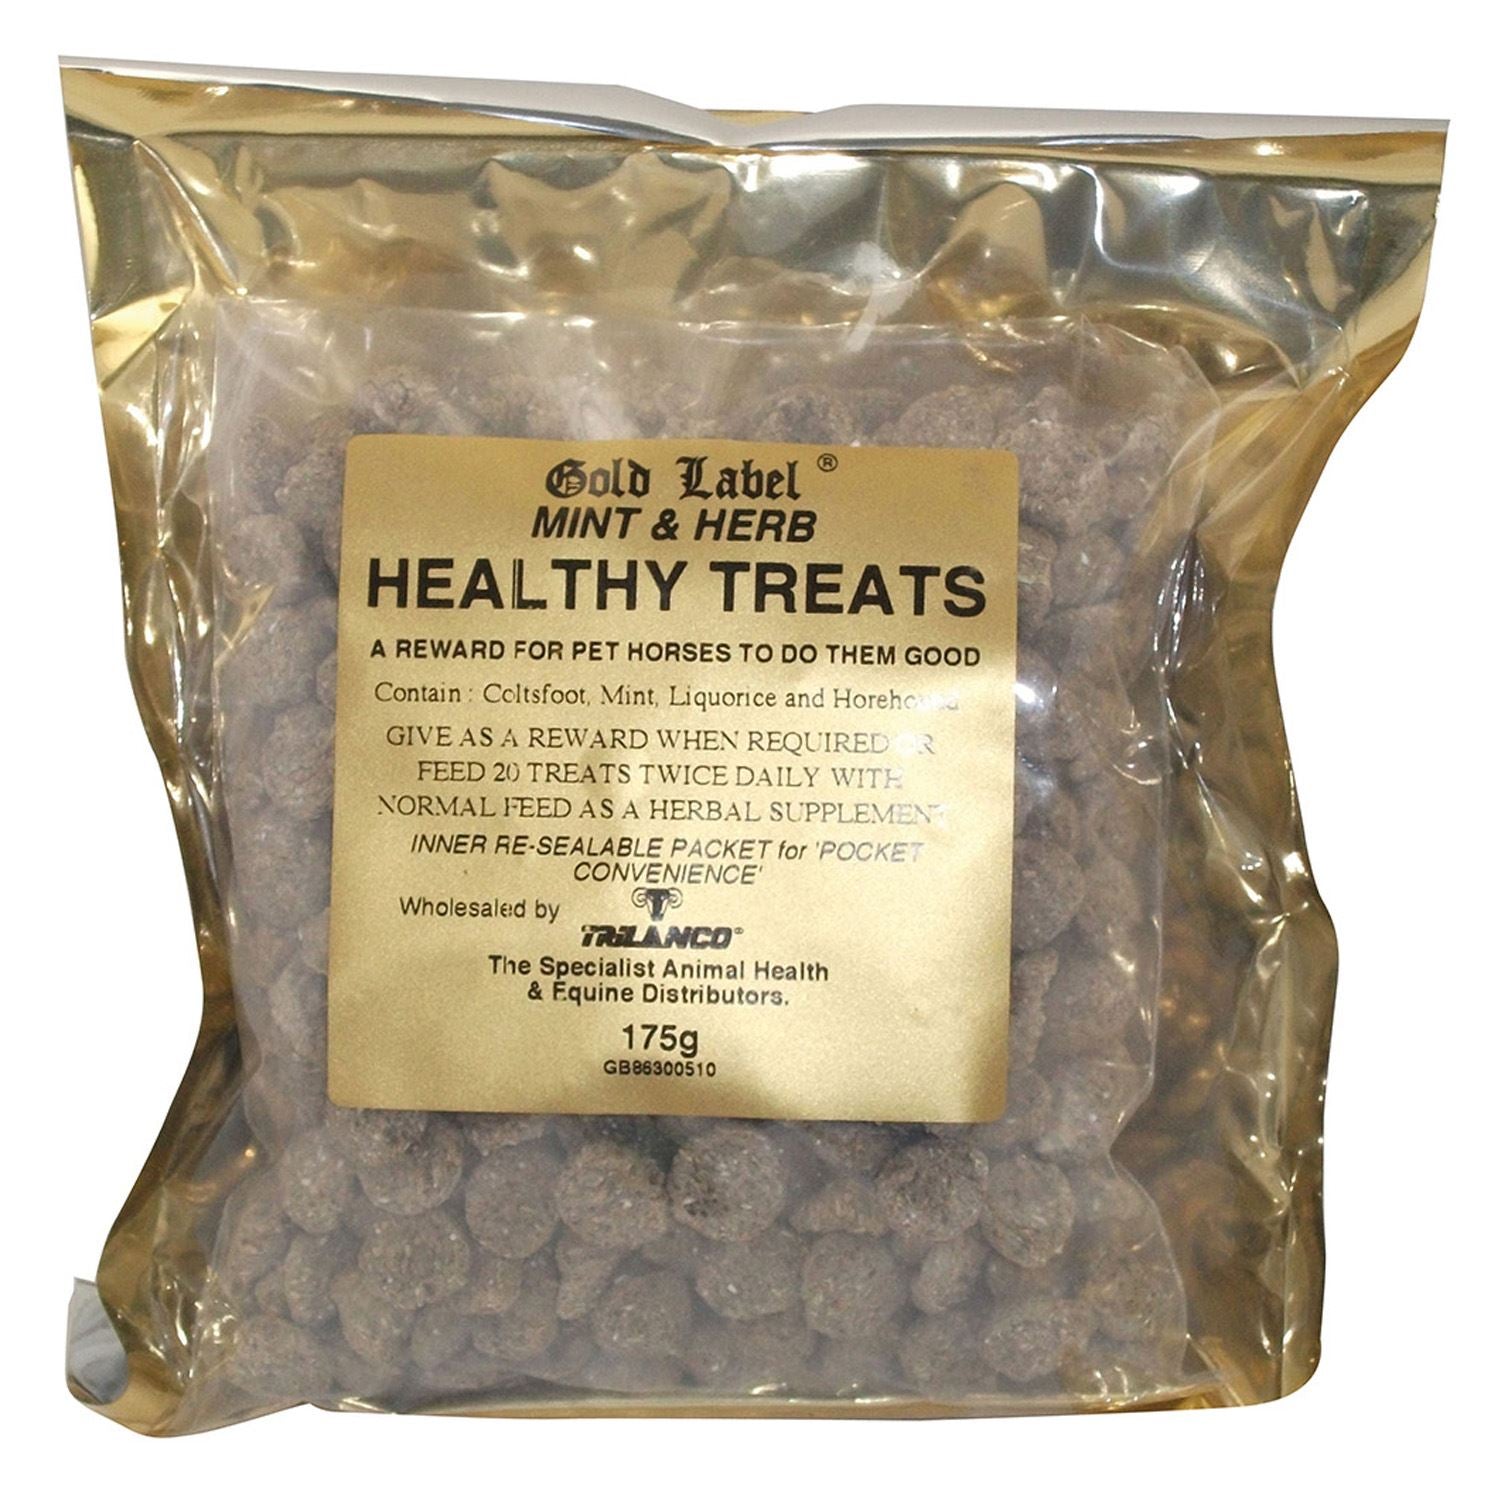 Gold Label Herbal Healthy Treats Mint/Herb - Just Horse Riders